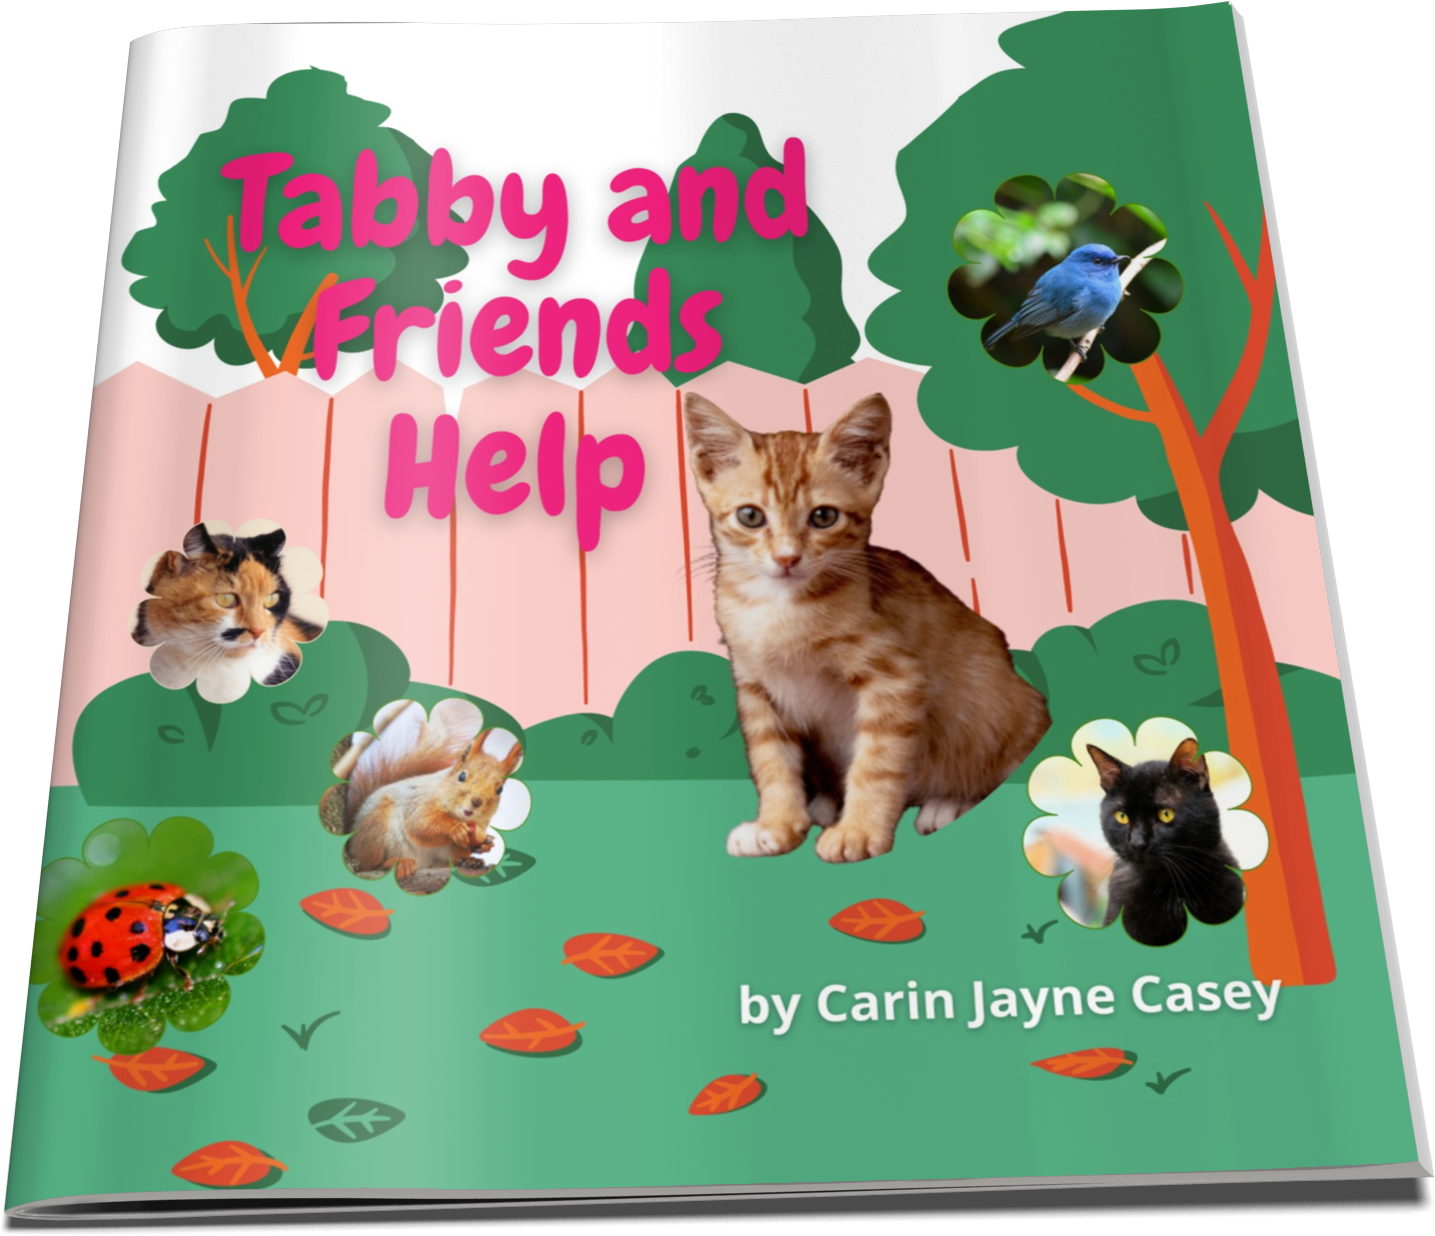 Tabby and Friends Help